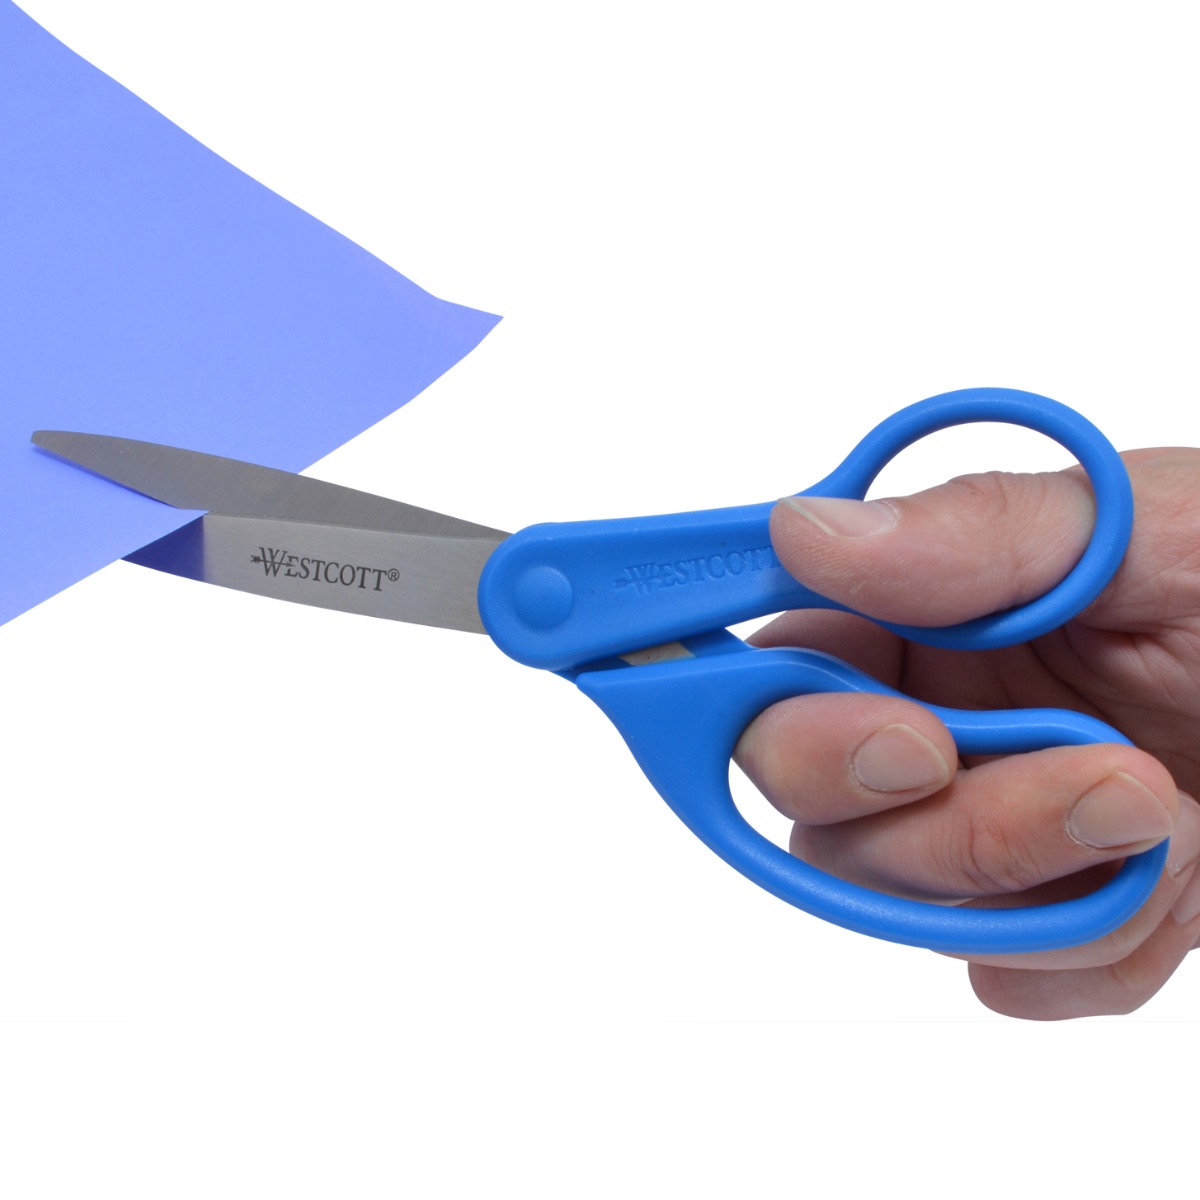 https://d38zcepchip0tz.cloudfront.net/media/catalog/product/4/1/41218_8in_all_purpose_scissors_in_use_edited_1.jpg